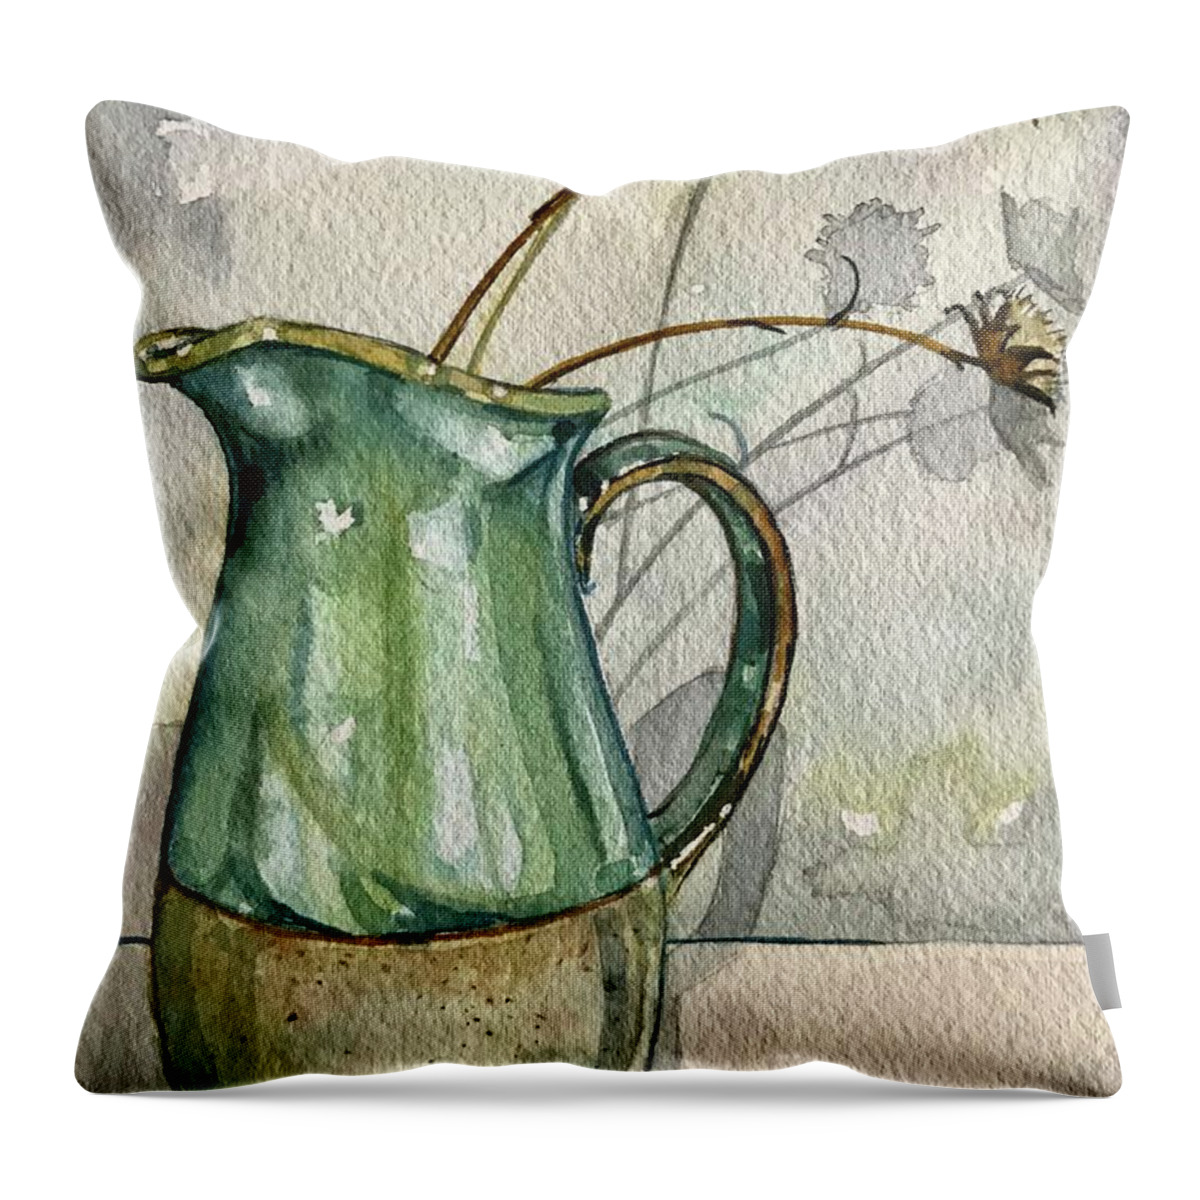 Jug Throw Pillow featuring the painting Green Jug by Luisa Millicent